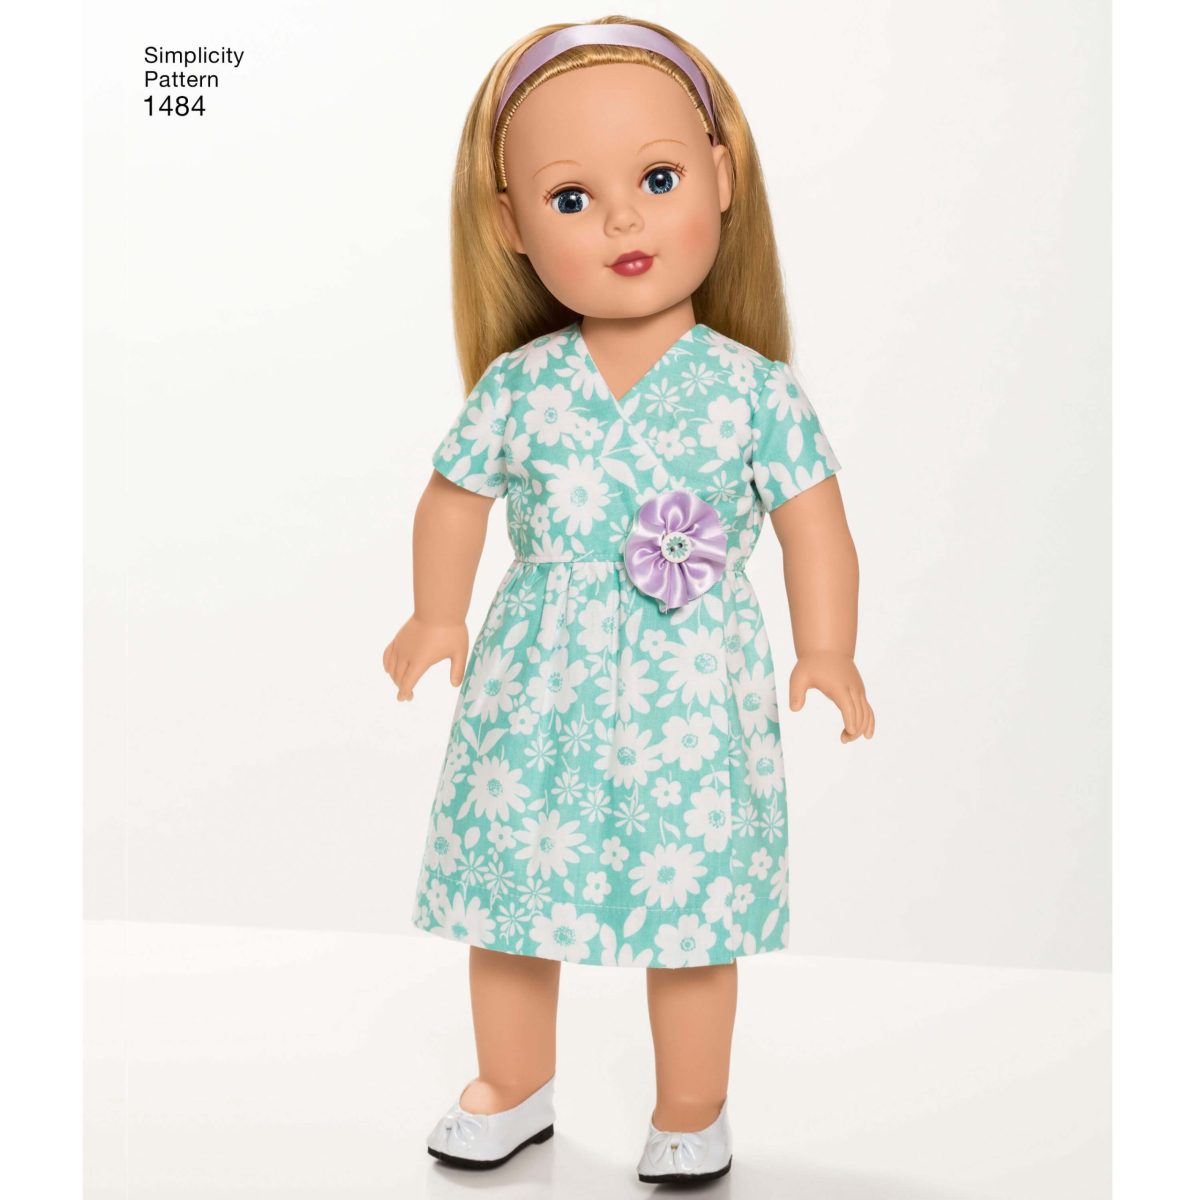 Simplicity Sewing Pattern 1484 Doll Clothes